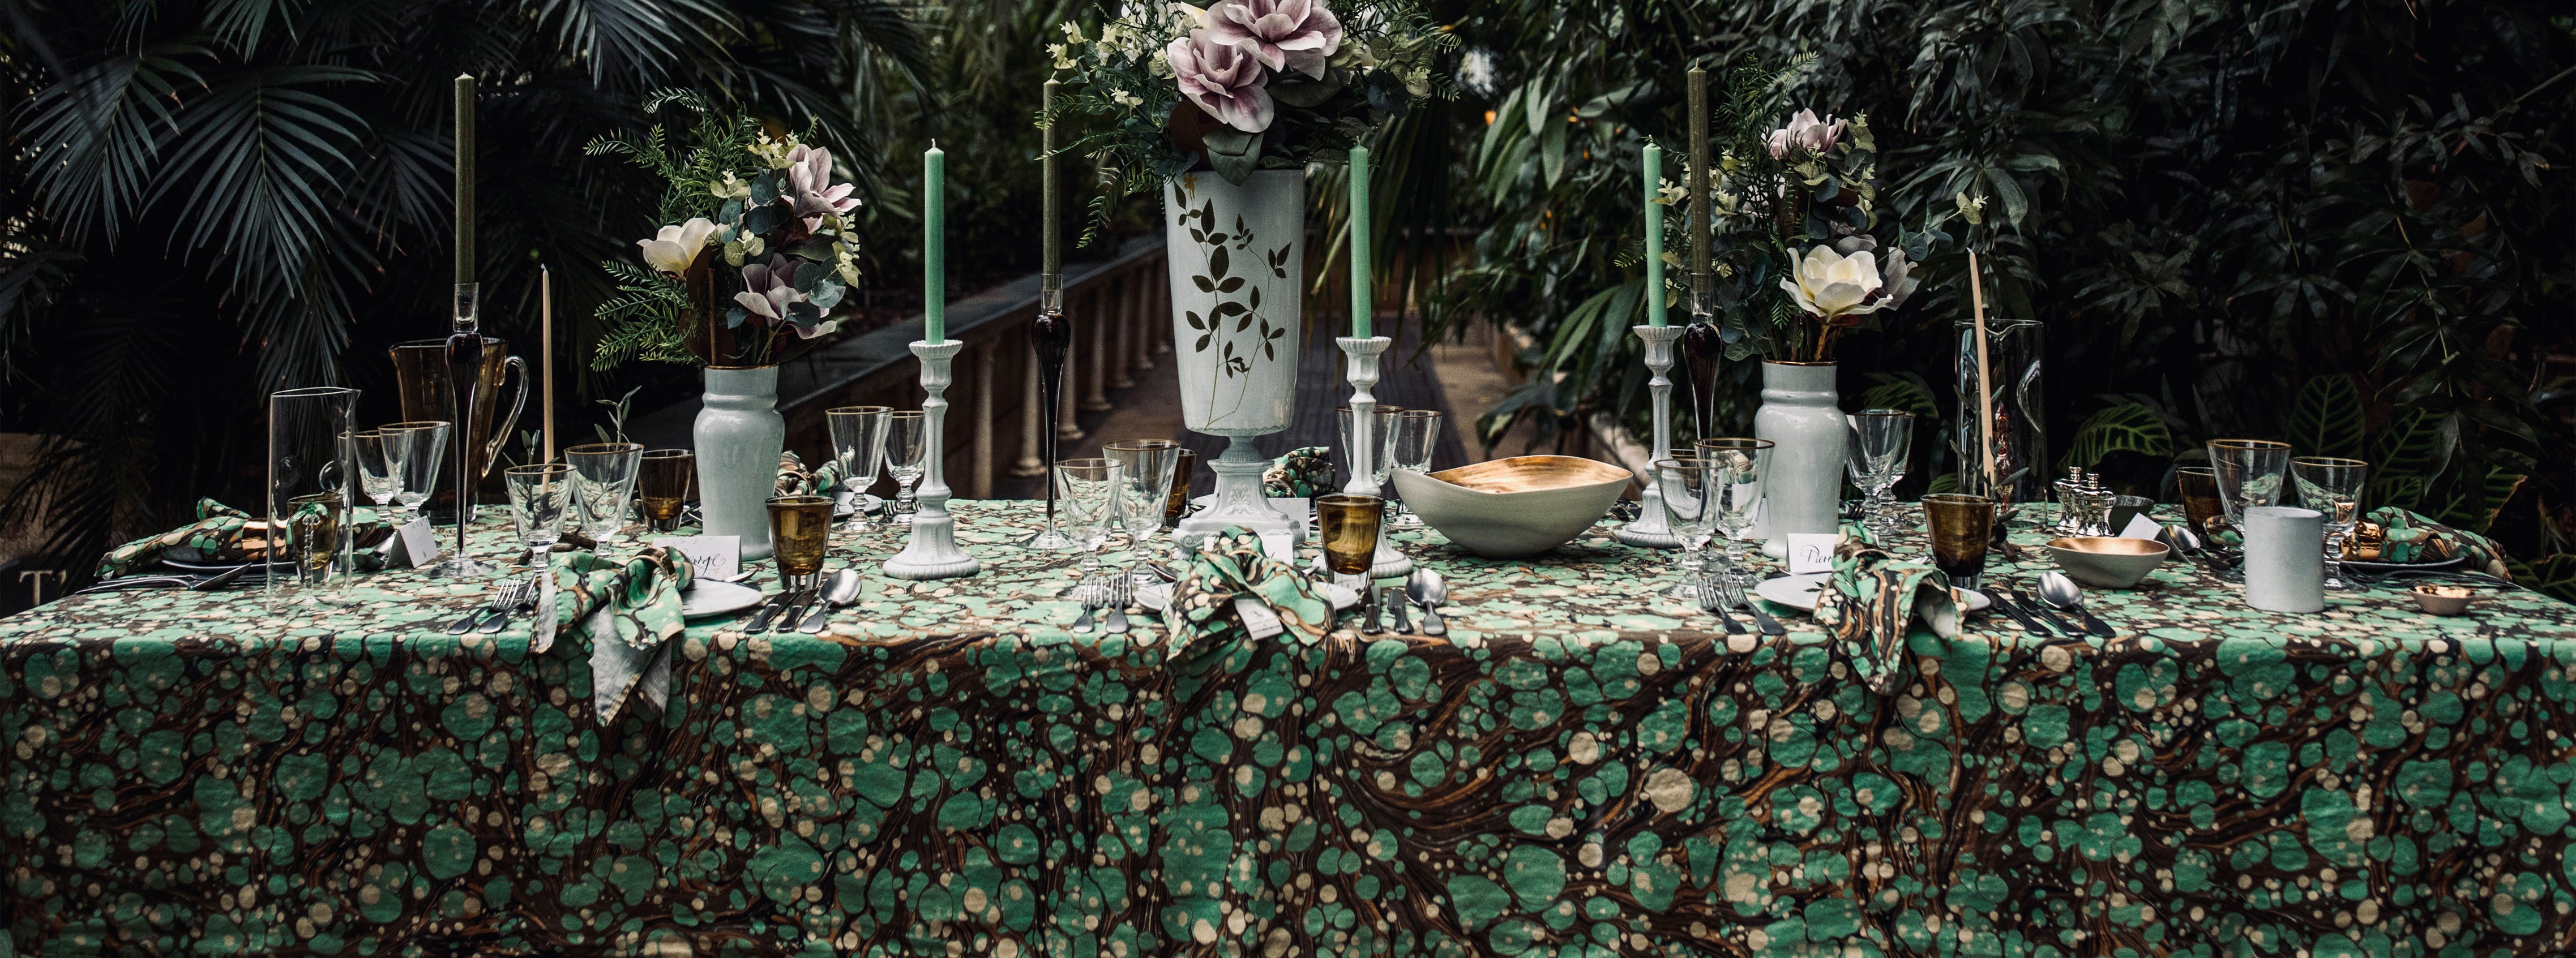 MatchesFashion 'Marble' Tablescape in Green